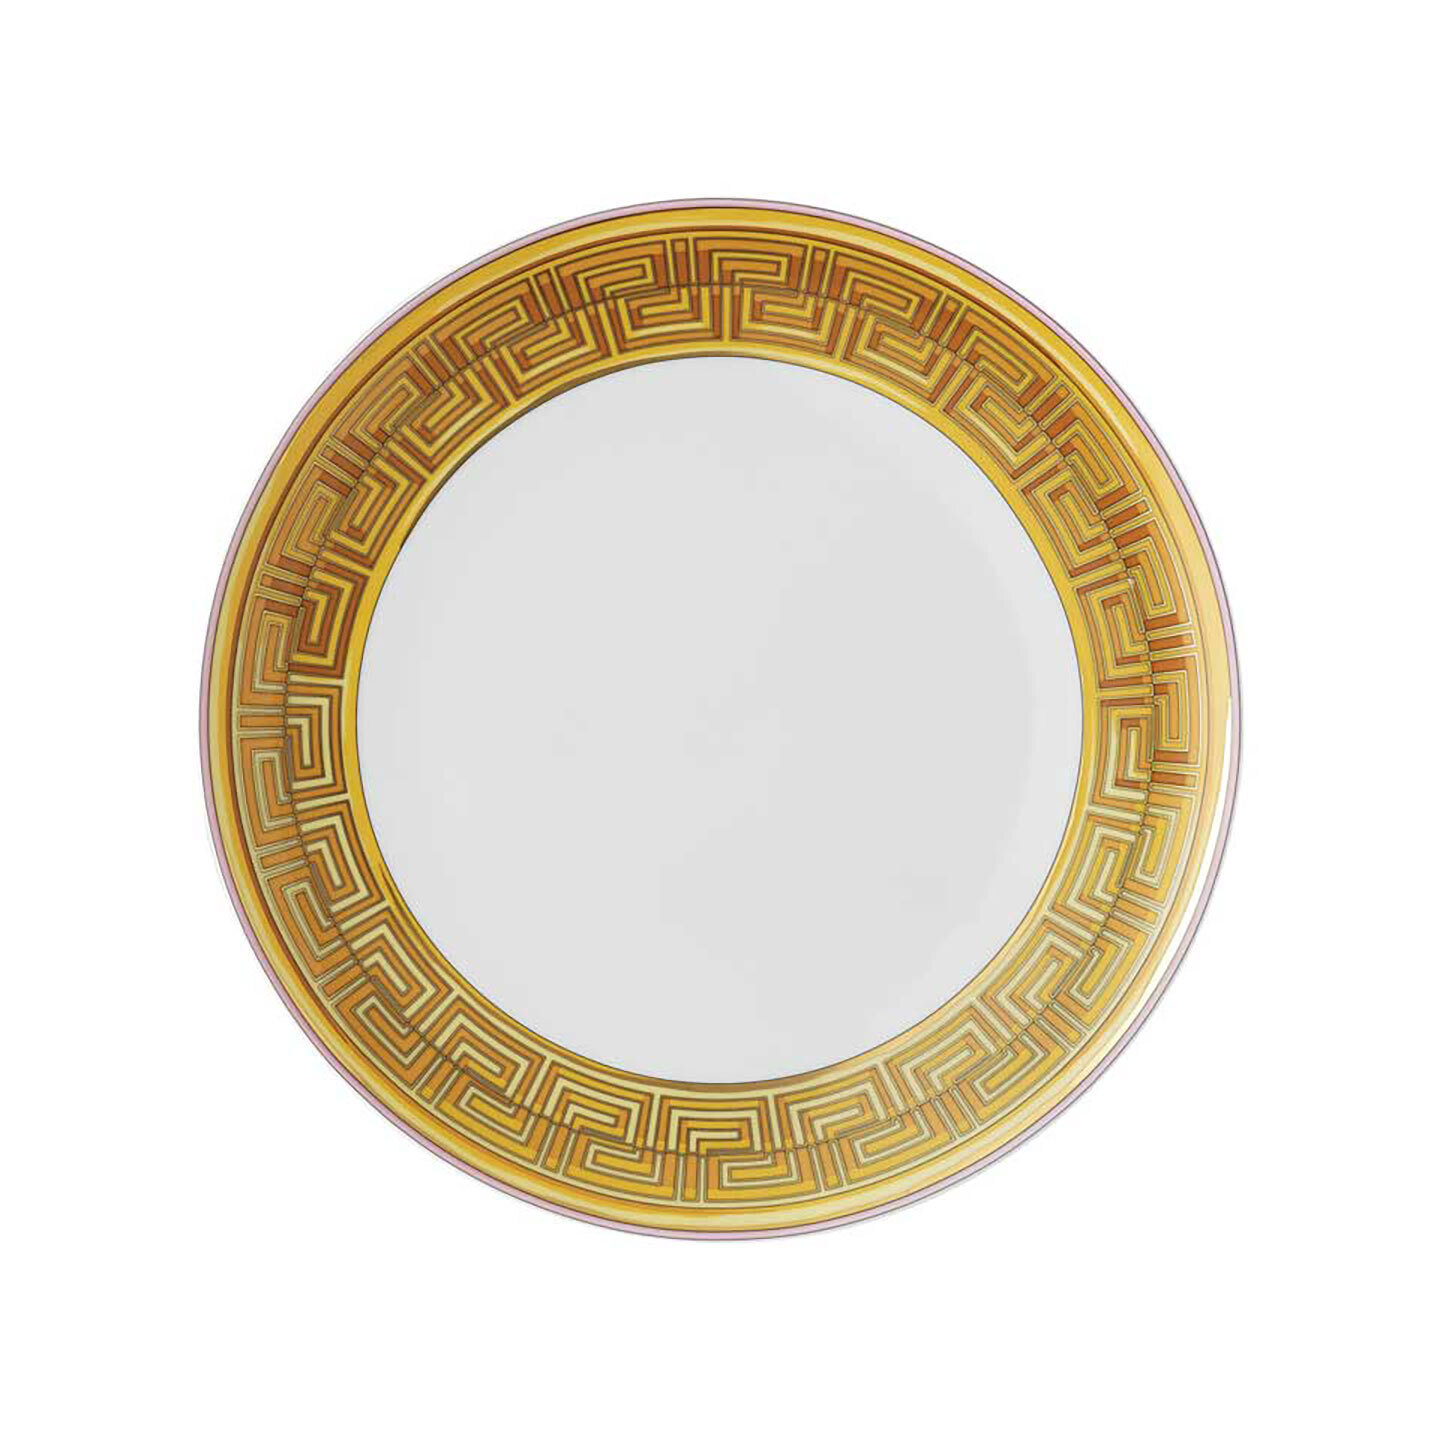 Versace Medusa Amplified Pink Coin Dinner Plate 11 Inch